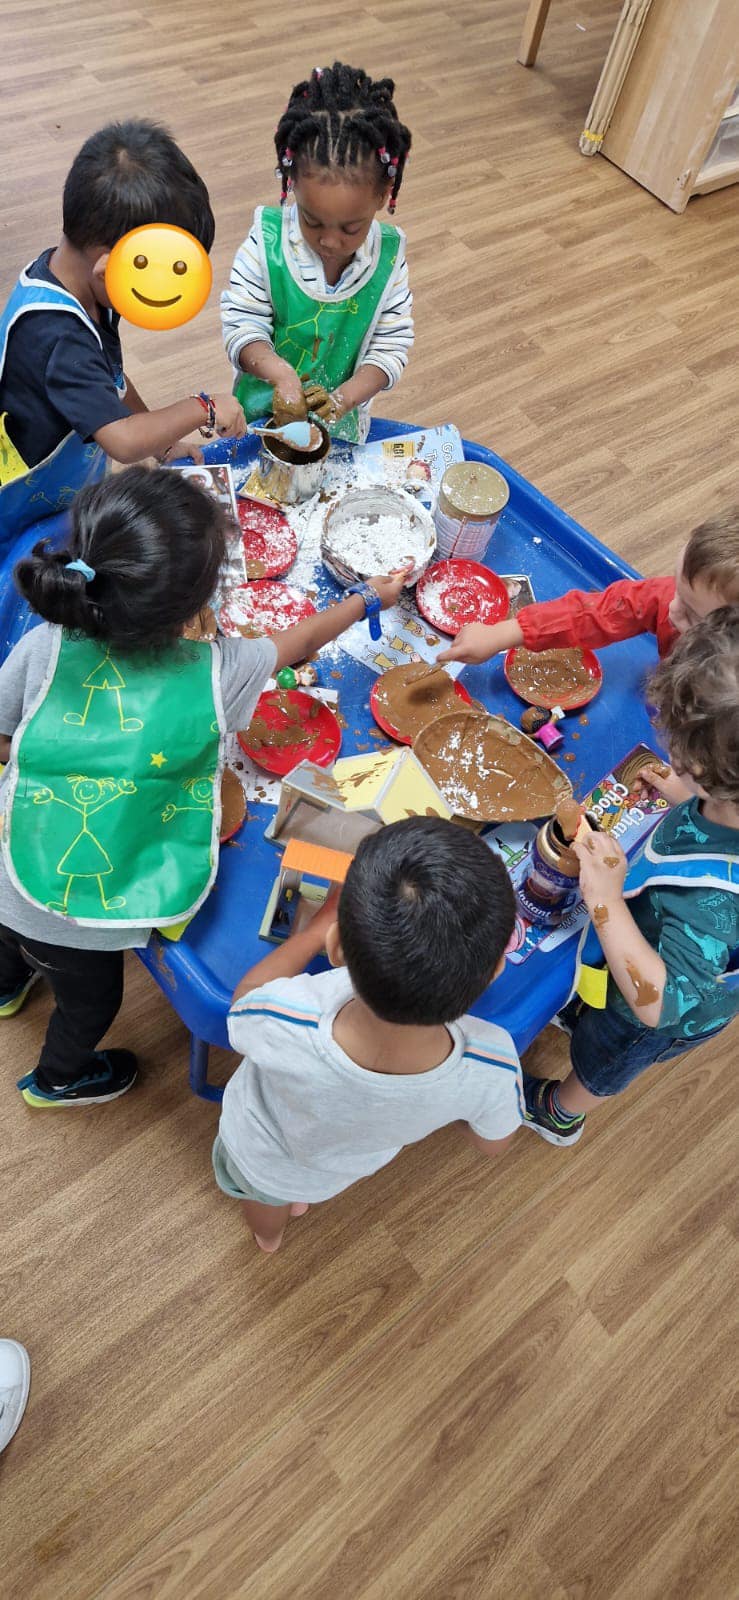 messy play all togehter as a group